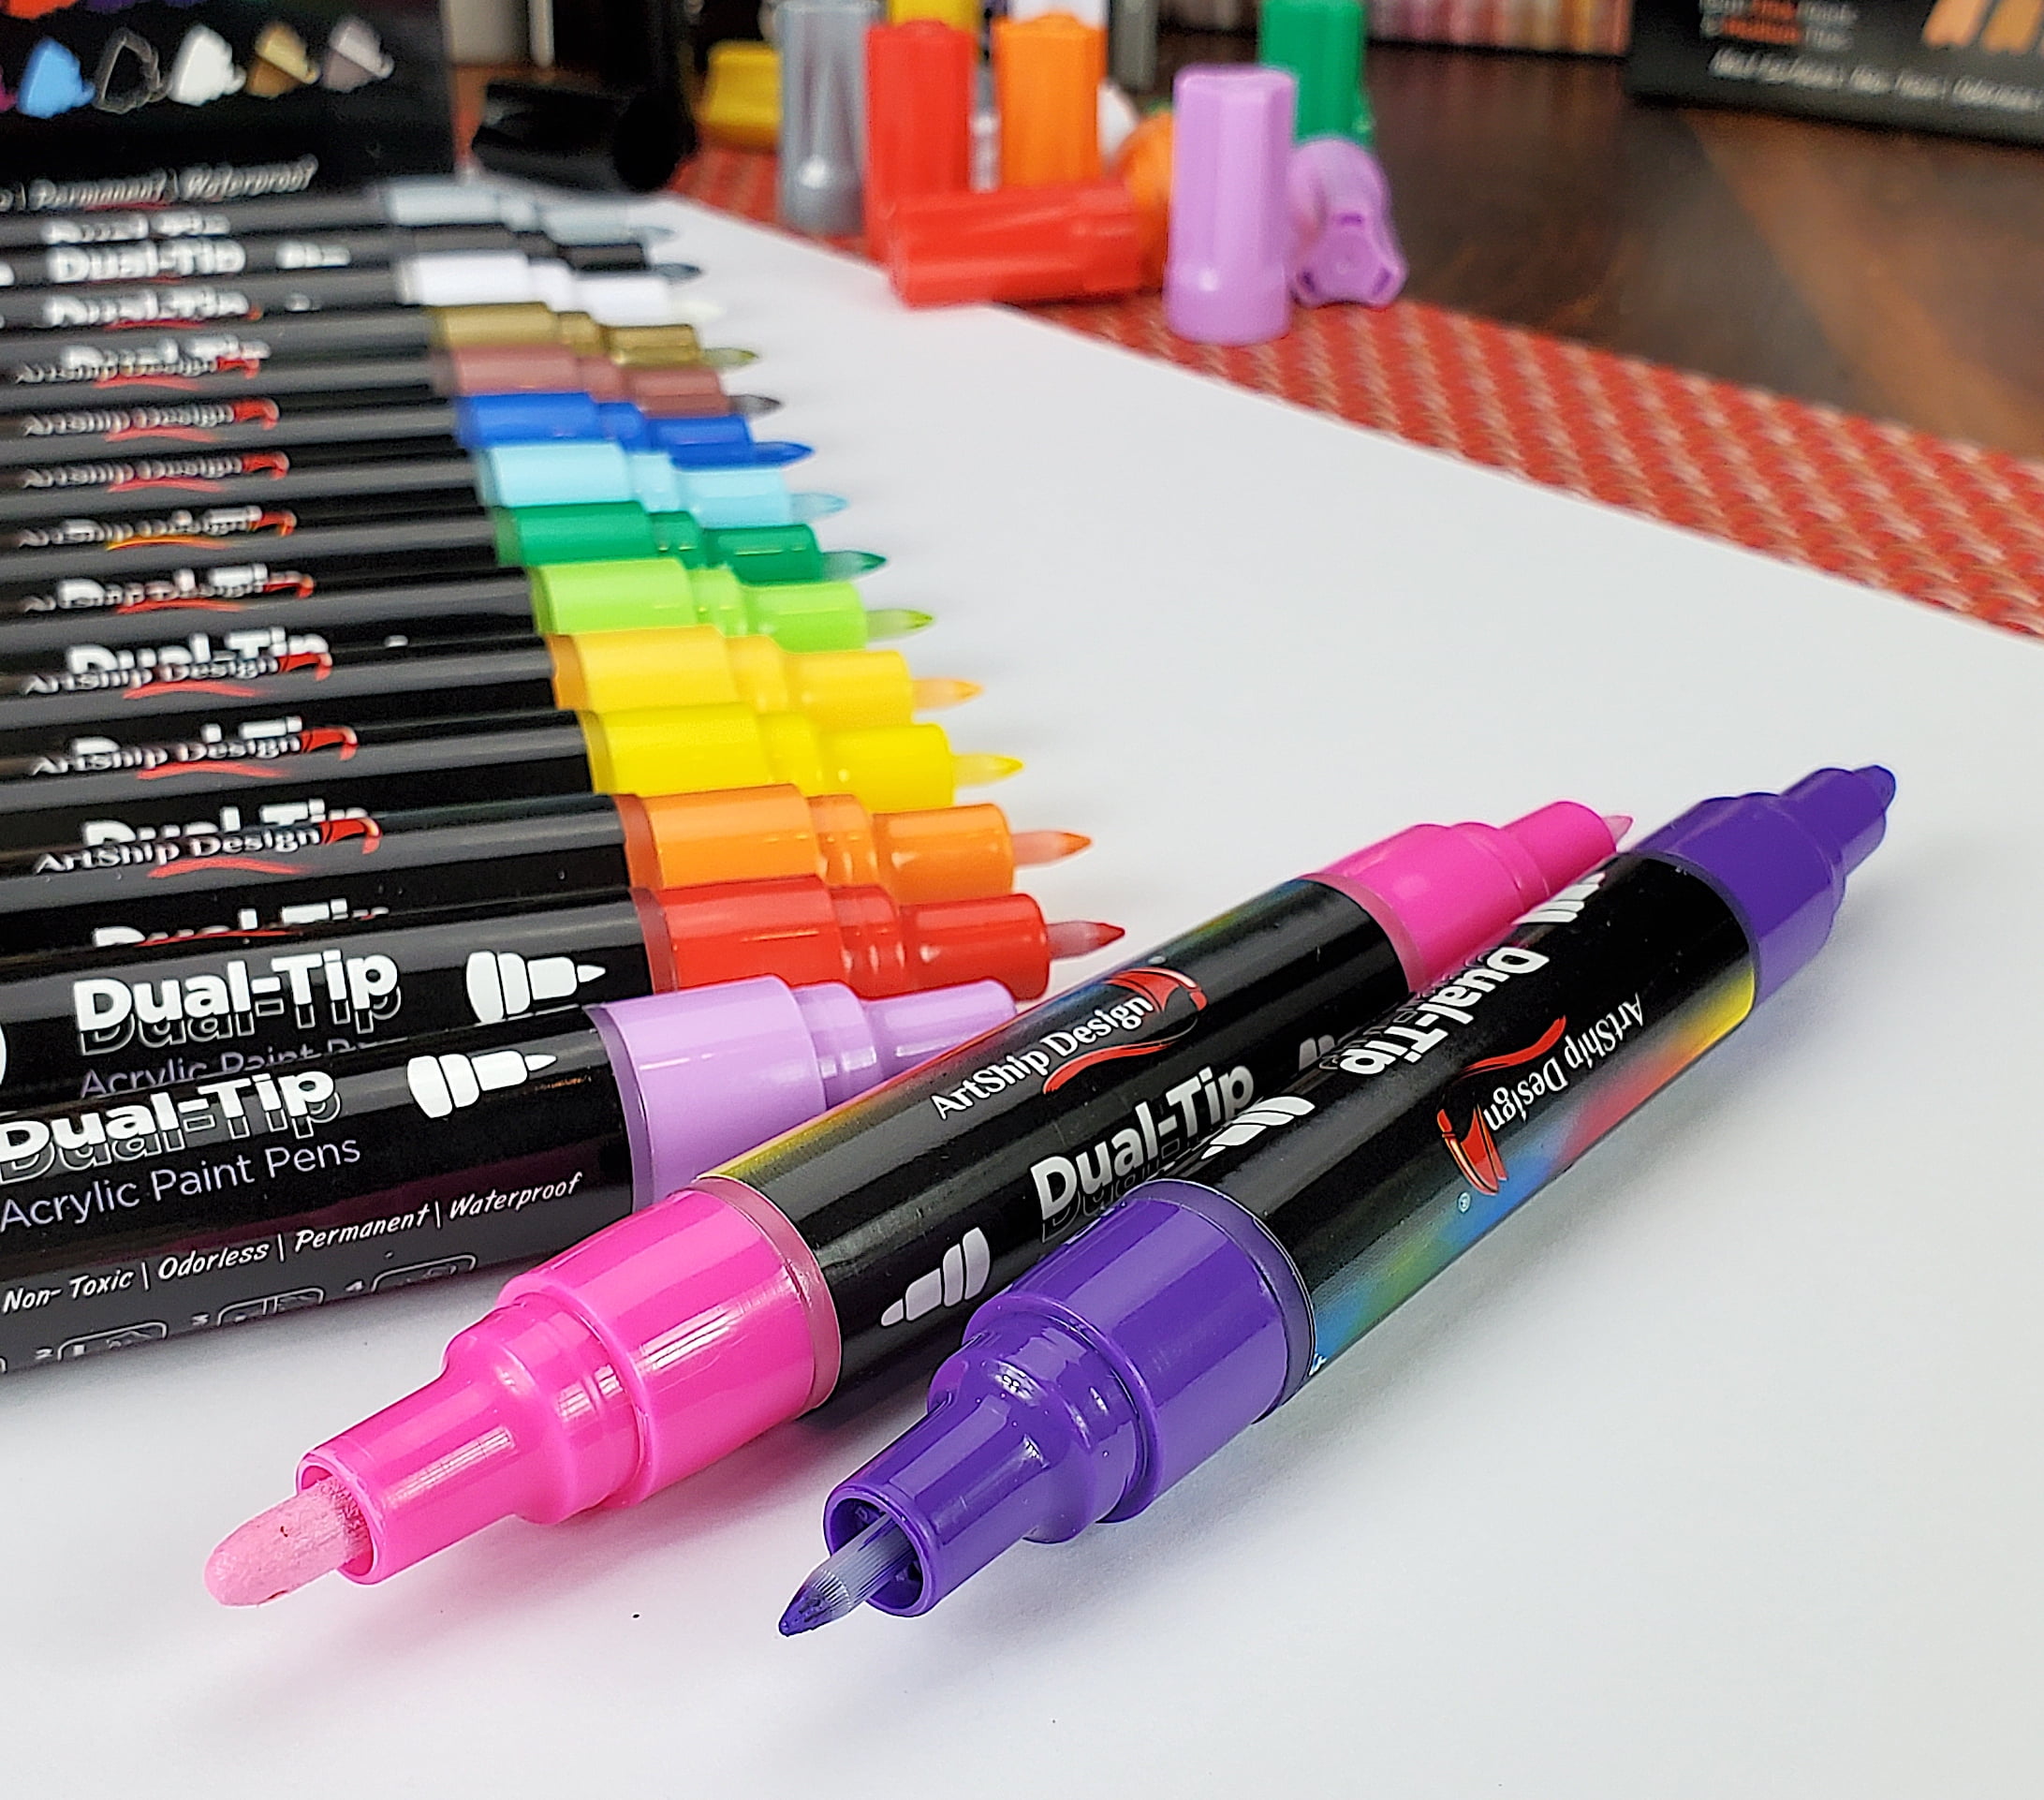 Arrtx Acrylic Paint Markers, 10mm Felt Tip Jumbo Markers, 12 Pack Neon  Colored Graffiti Markers, Permanent Paint Pens